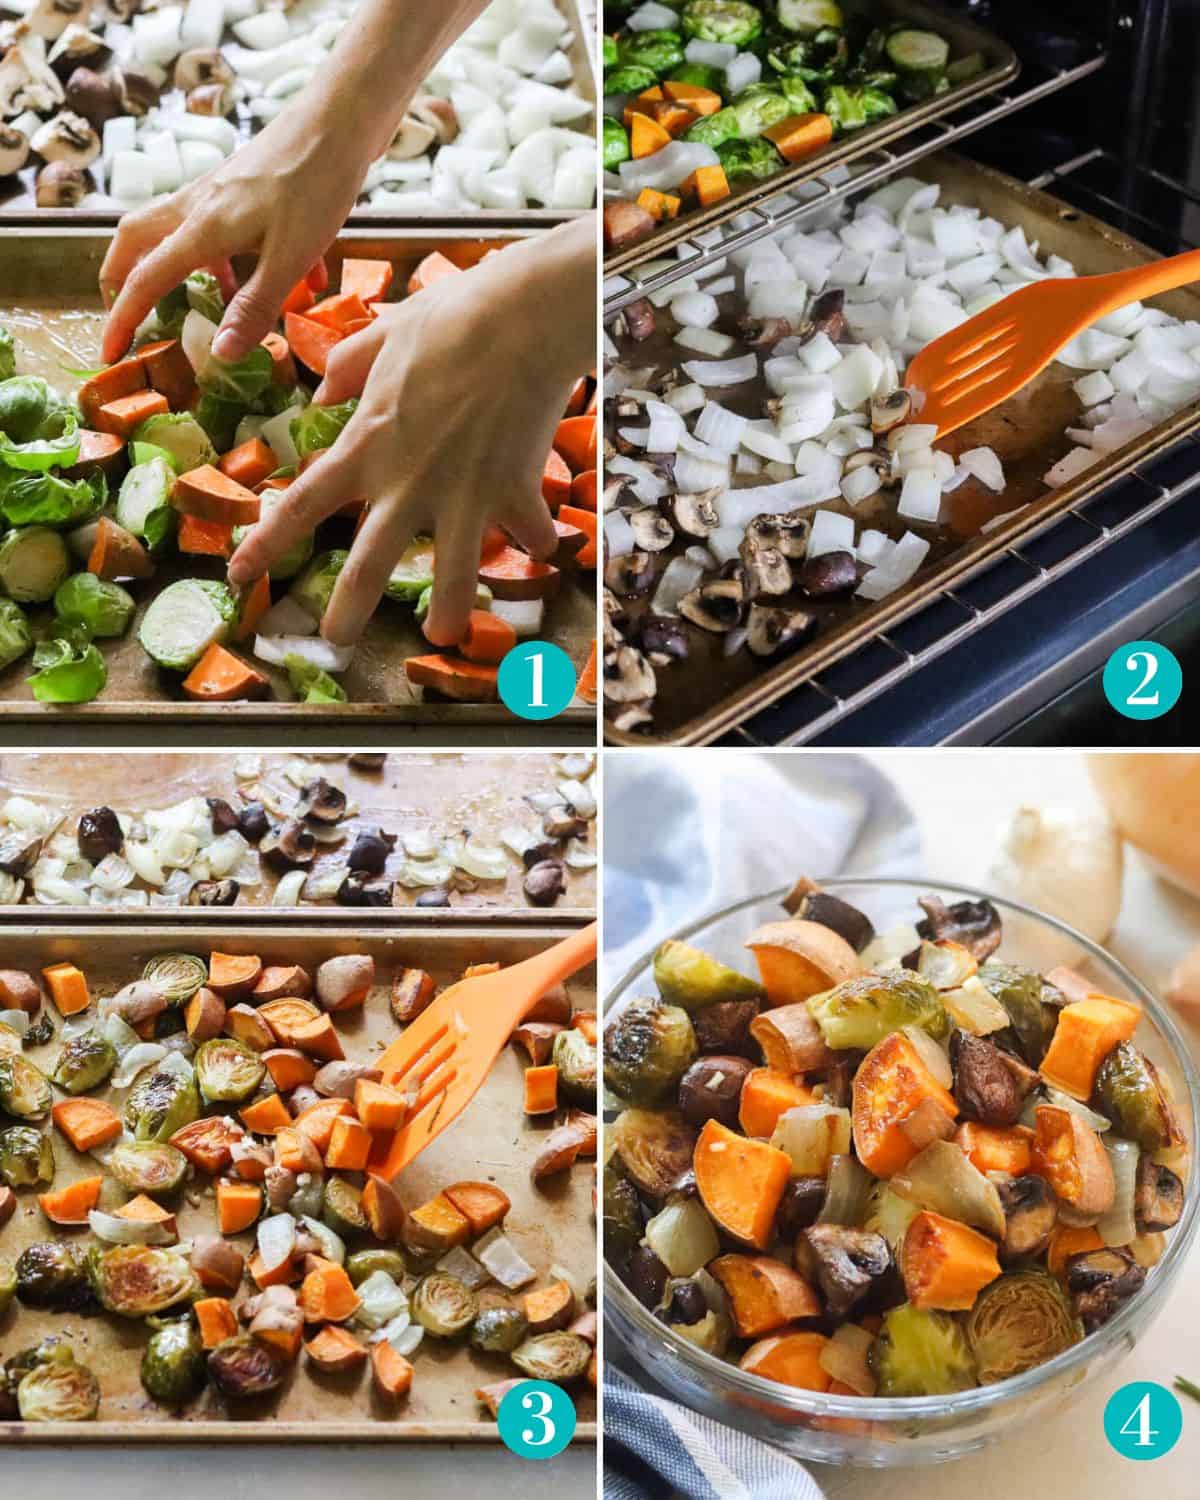 collage of photos with hands tossing vegetables on a baking sheet; orange spatula stirring the vegetables in the oven; orange spatula stirring vegetables and garlic on baking sheet on the counter; bowl of roasted veggies